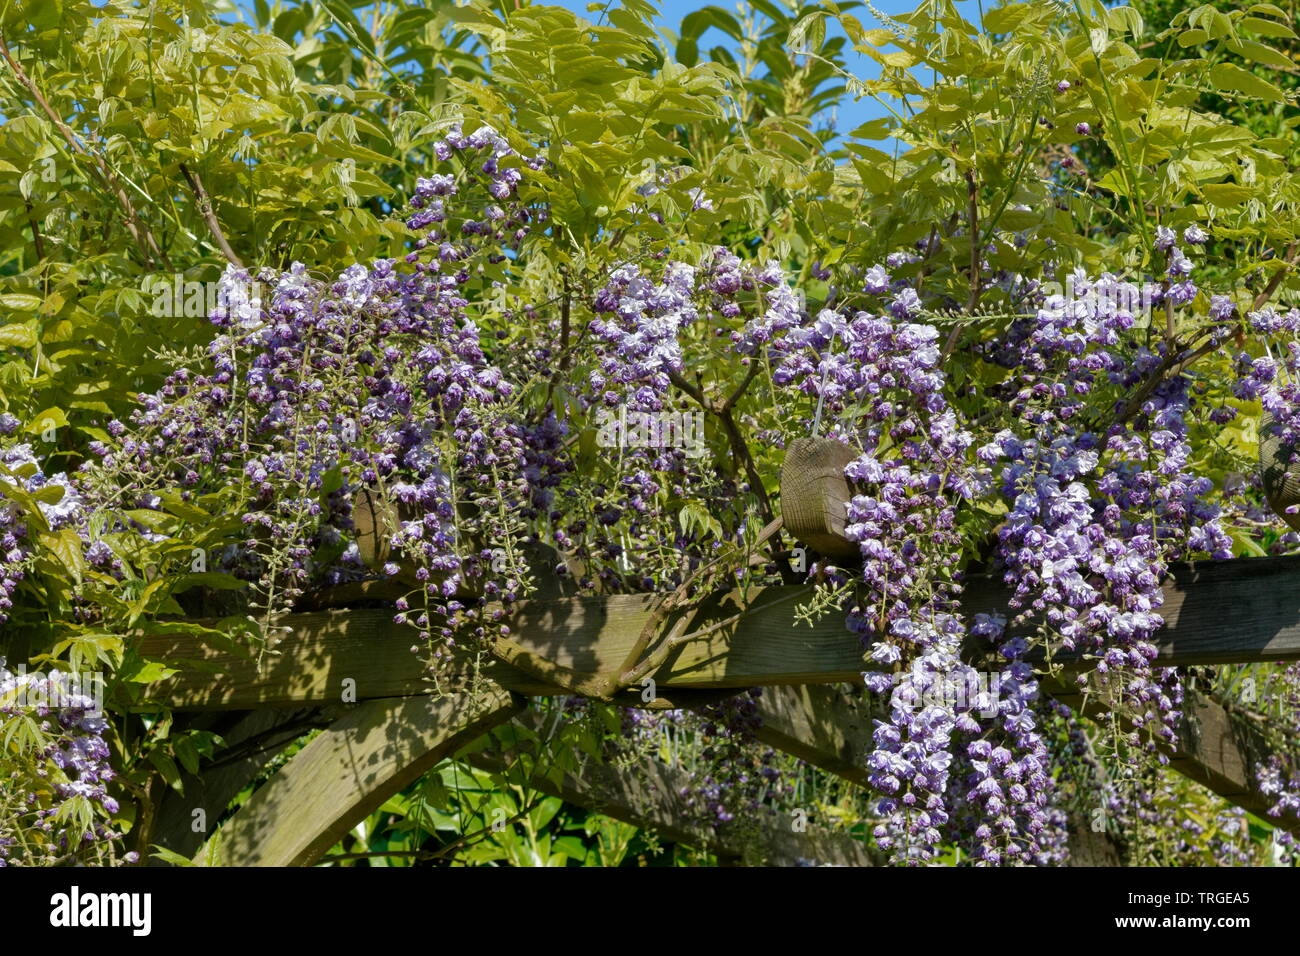 Wisteria with purple flowers hanging from a pergola against a blue sky Stock Photo